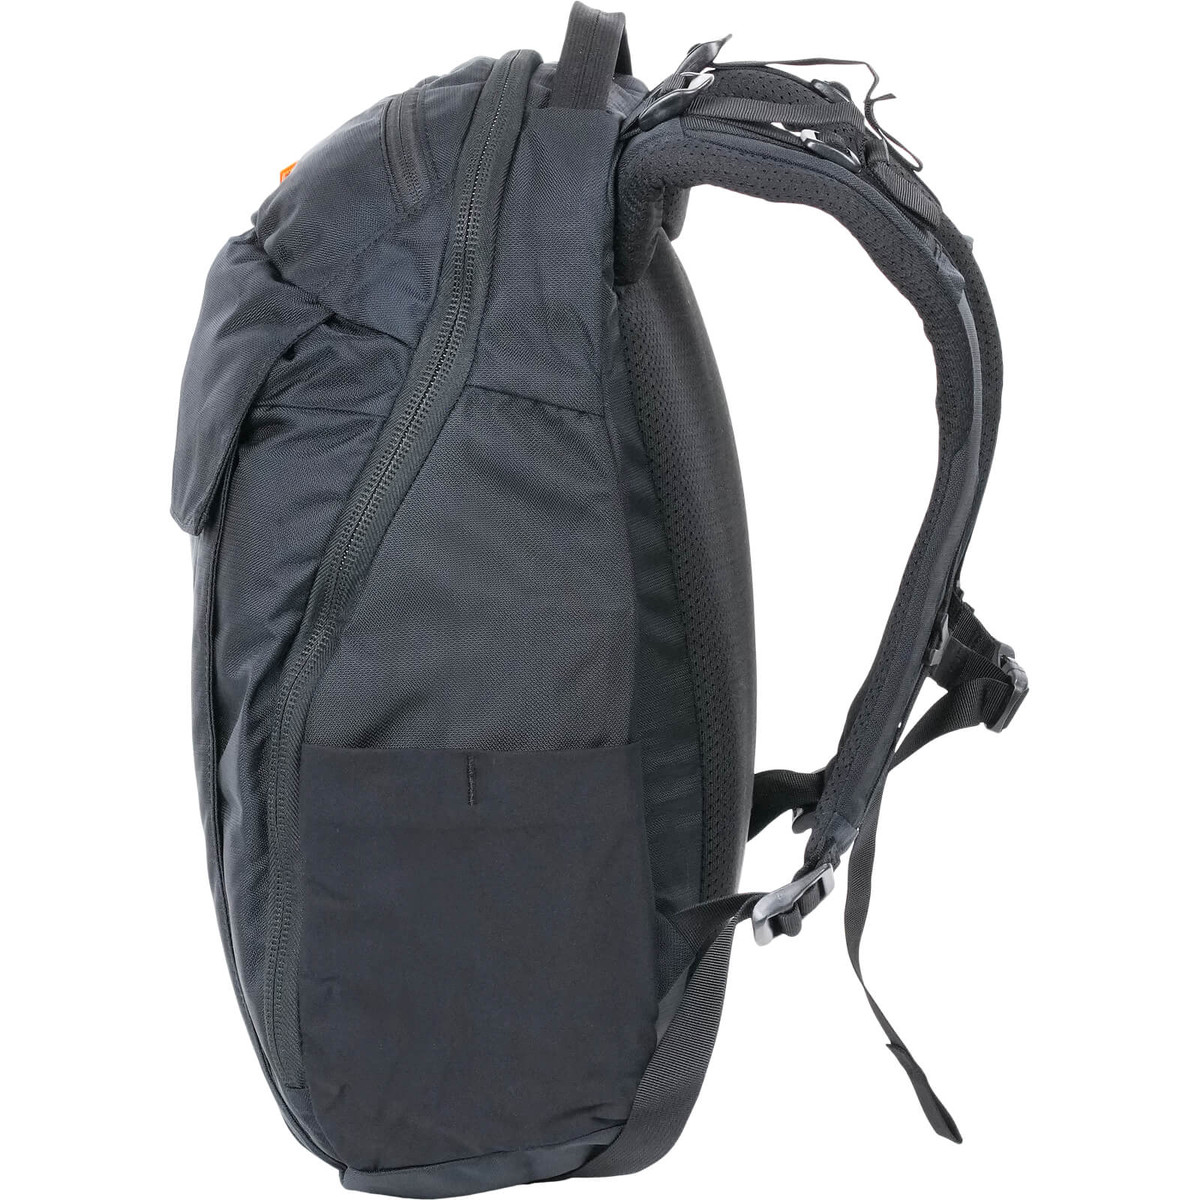 District 18 Backpack | Mystery Ranch | Adventure Gear Canada